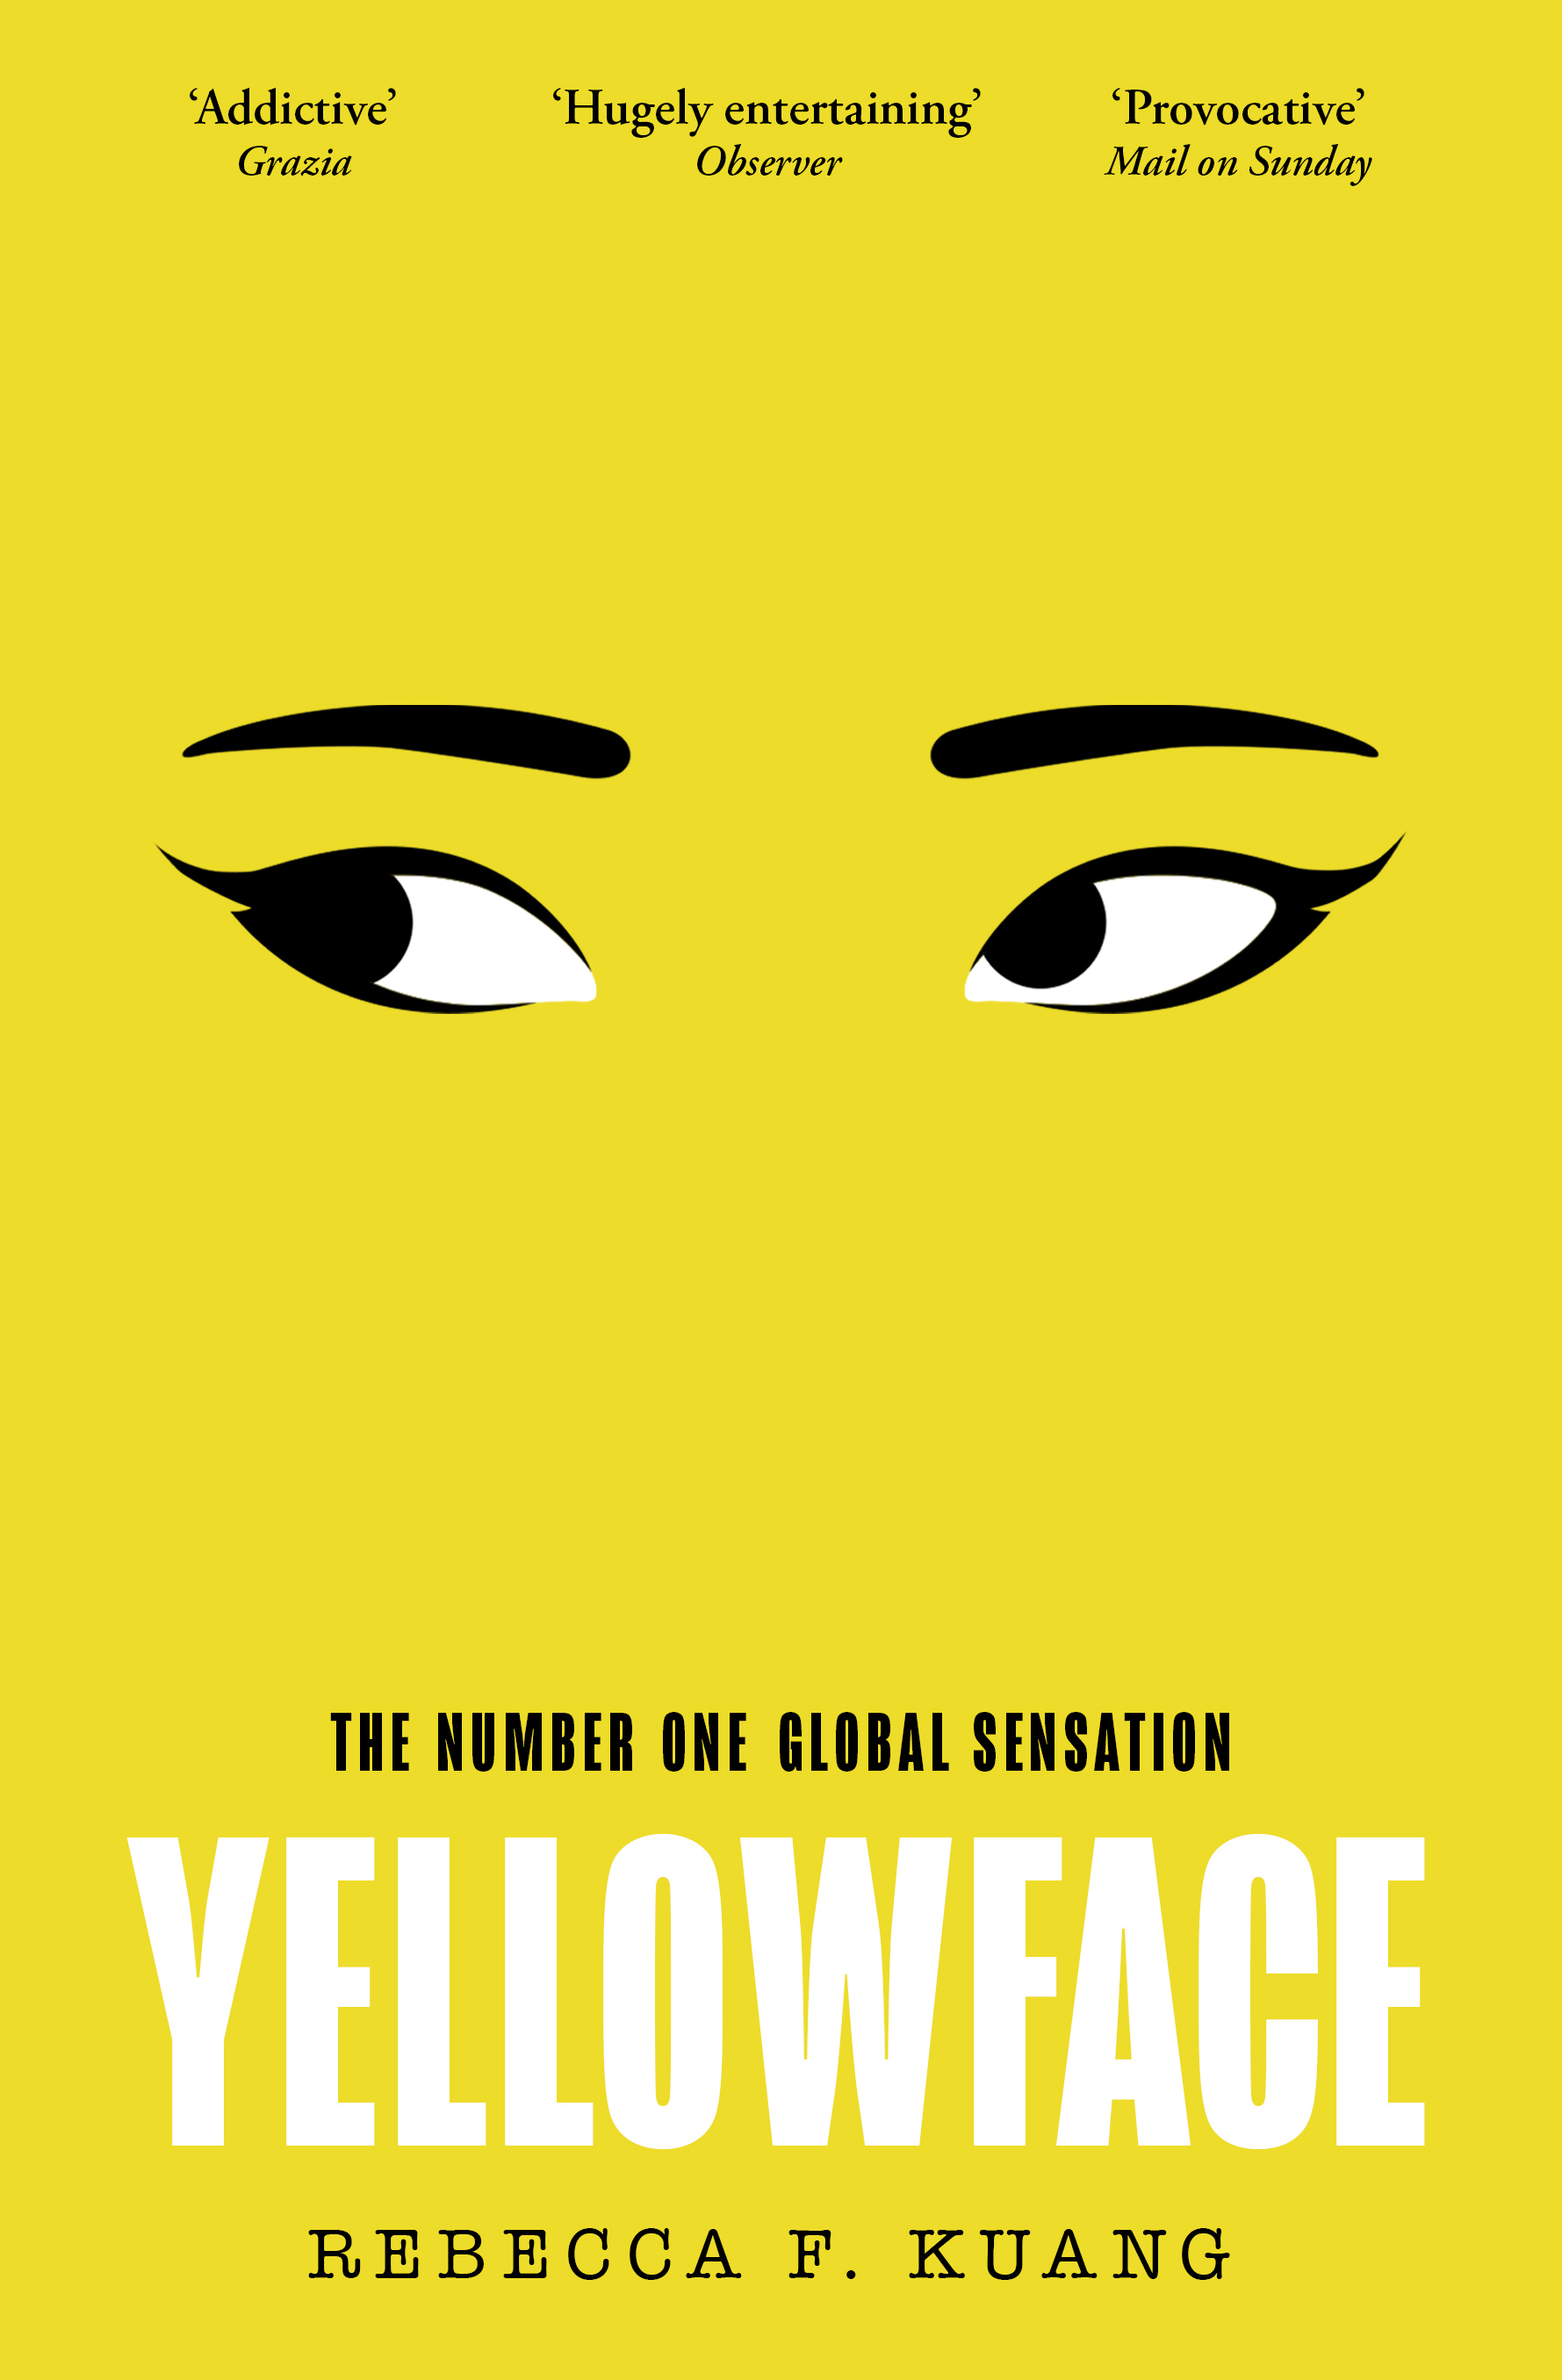 The front cover of Yellowface by Rebecca F Kuang, which is in the design of a yellow face